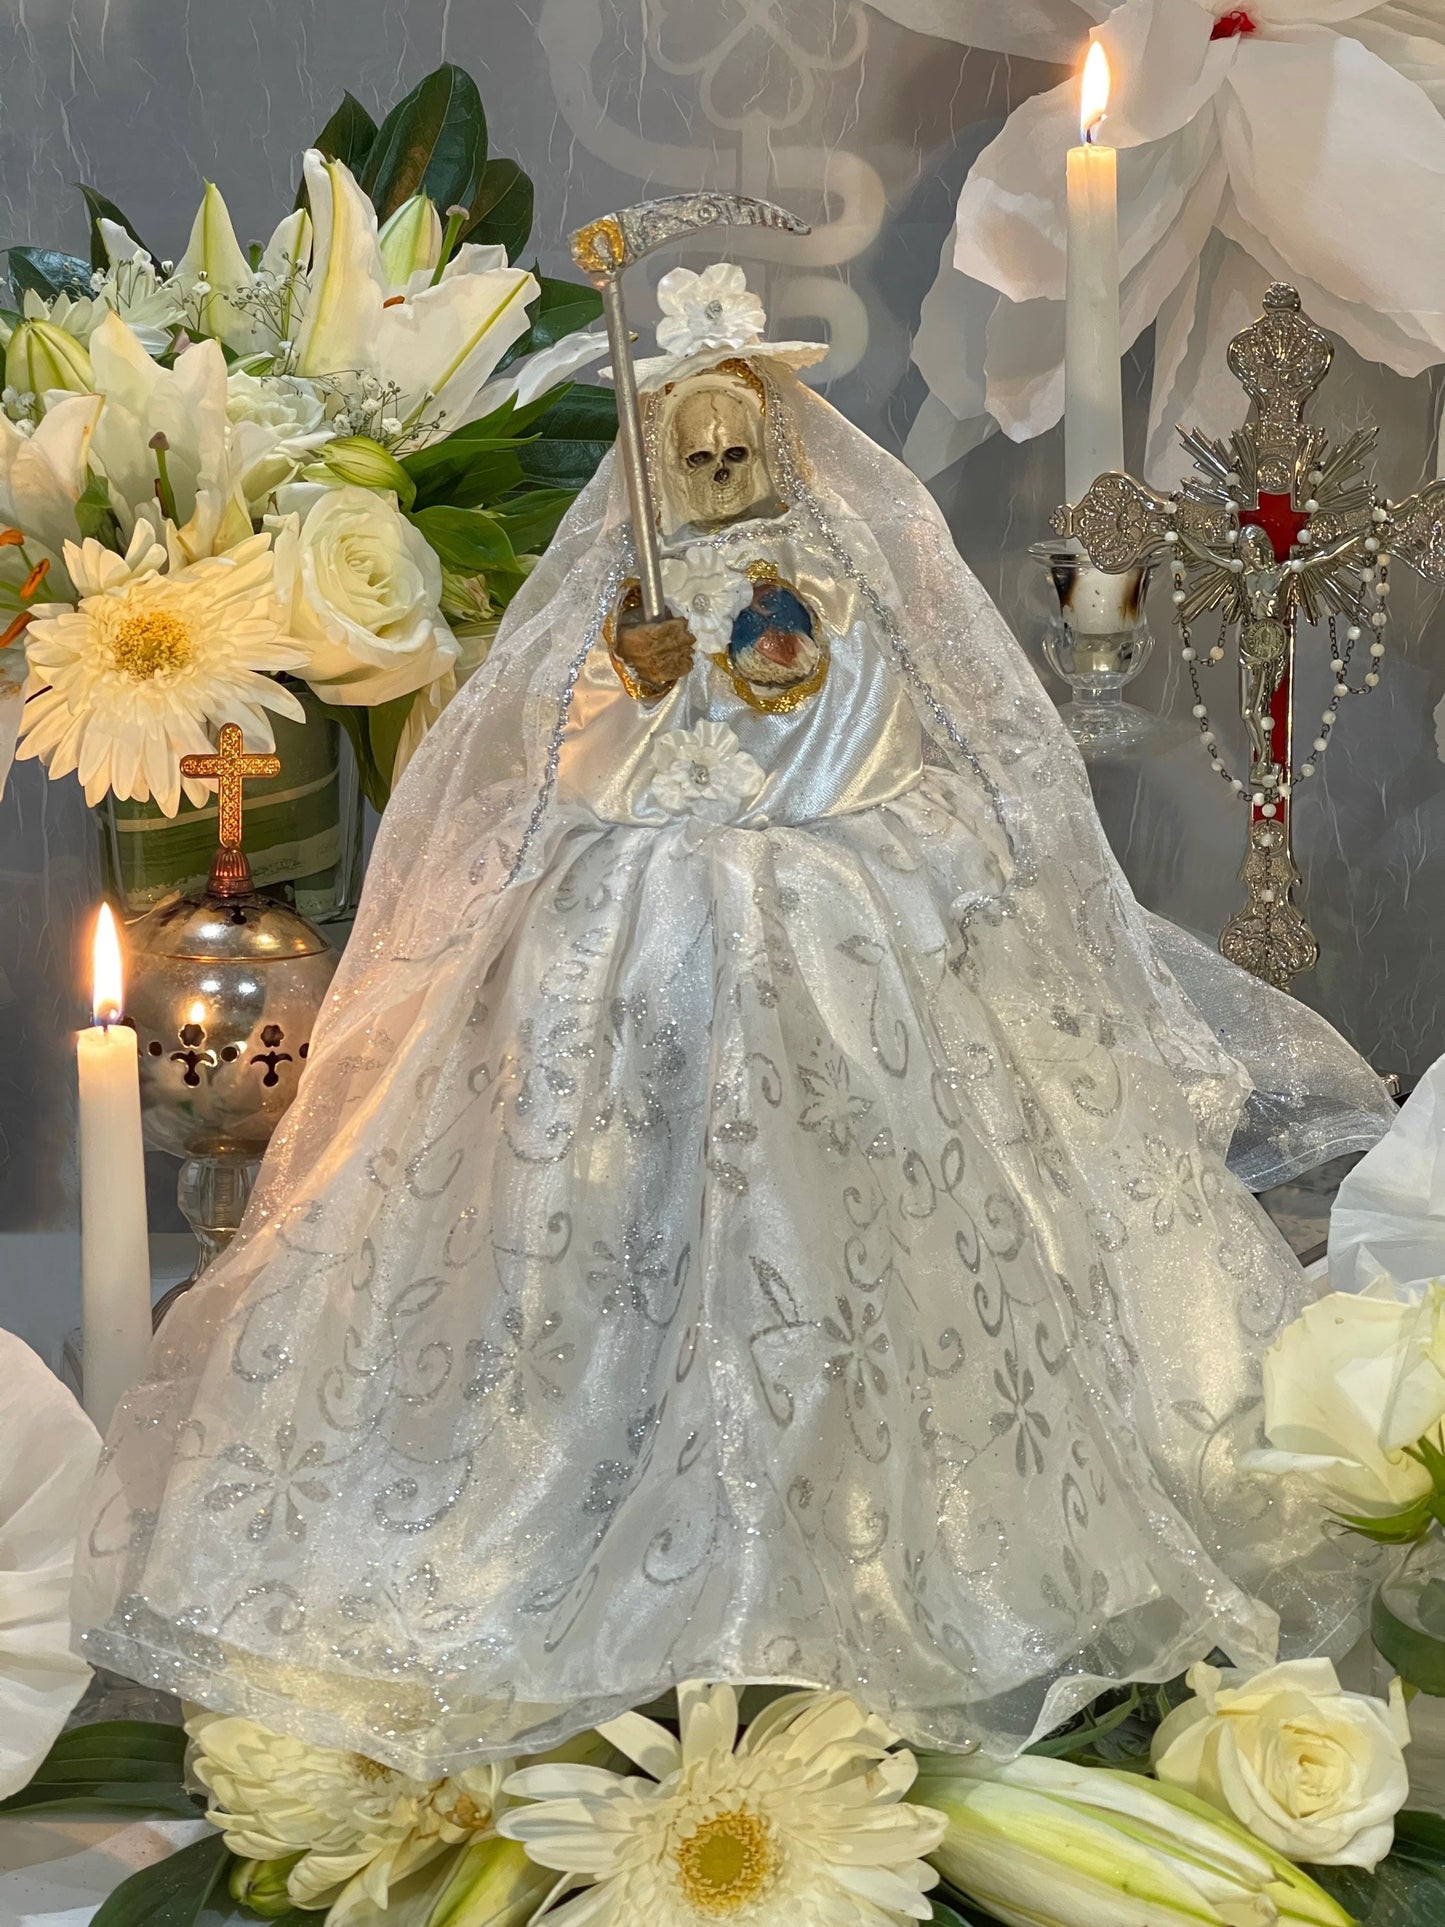 12” Santa Muerte Blanca Statue with Dress + Baptized + Fixed + Purity + Made in Mexico + 24K Gold Leaf on Scythe